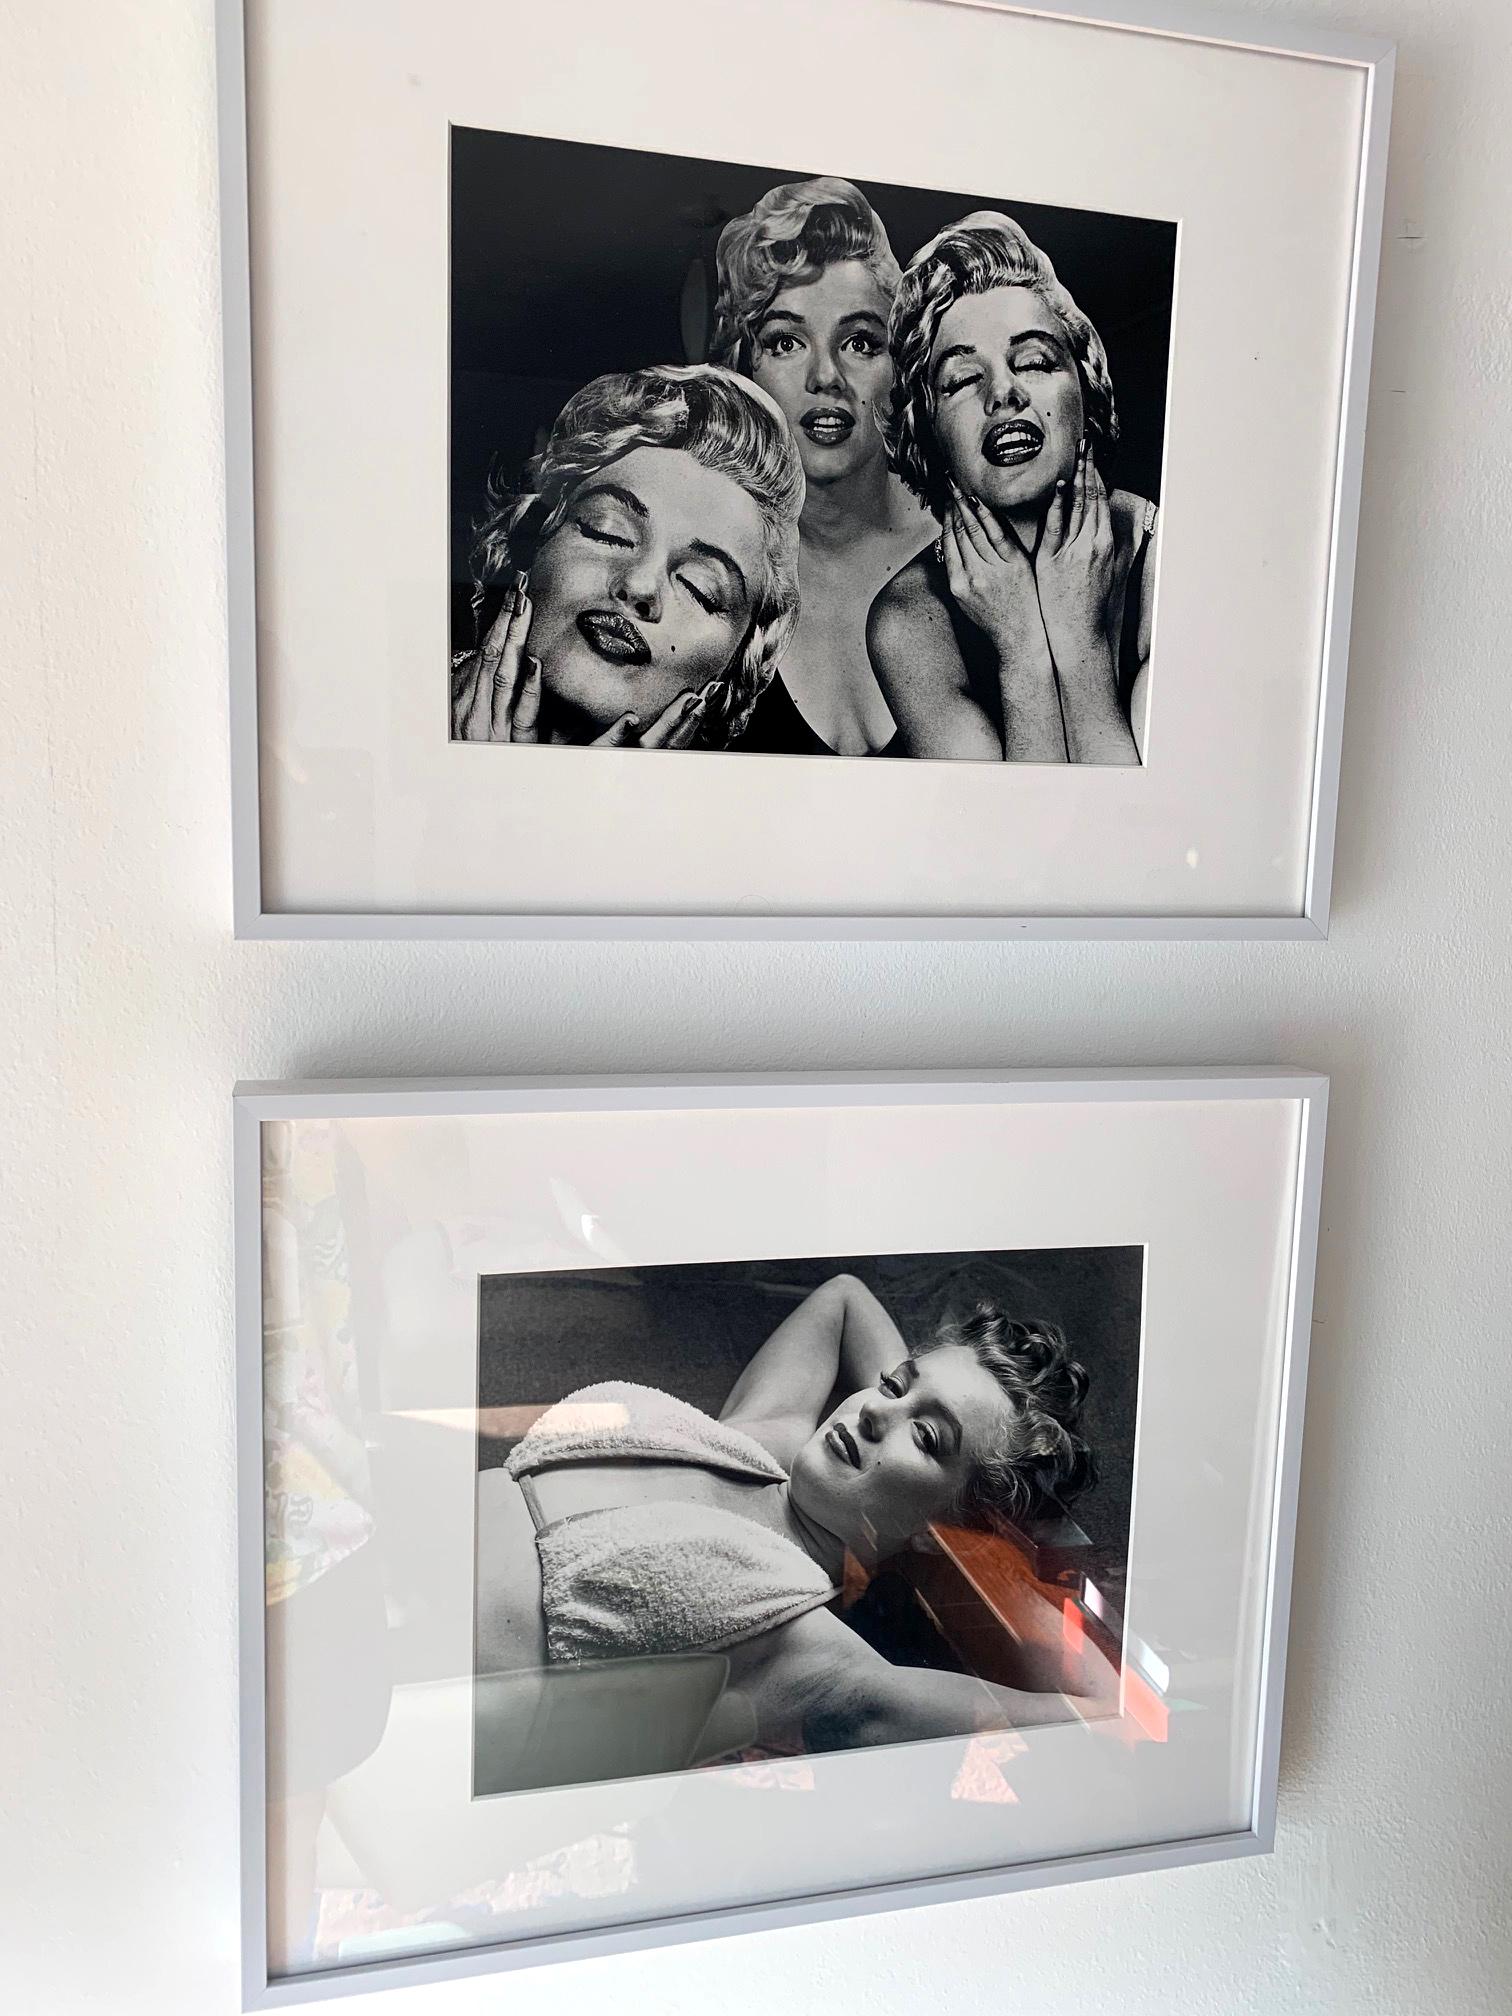 American Marilyn Monroe Photograph by Philippe Halsman For Sale